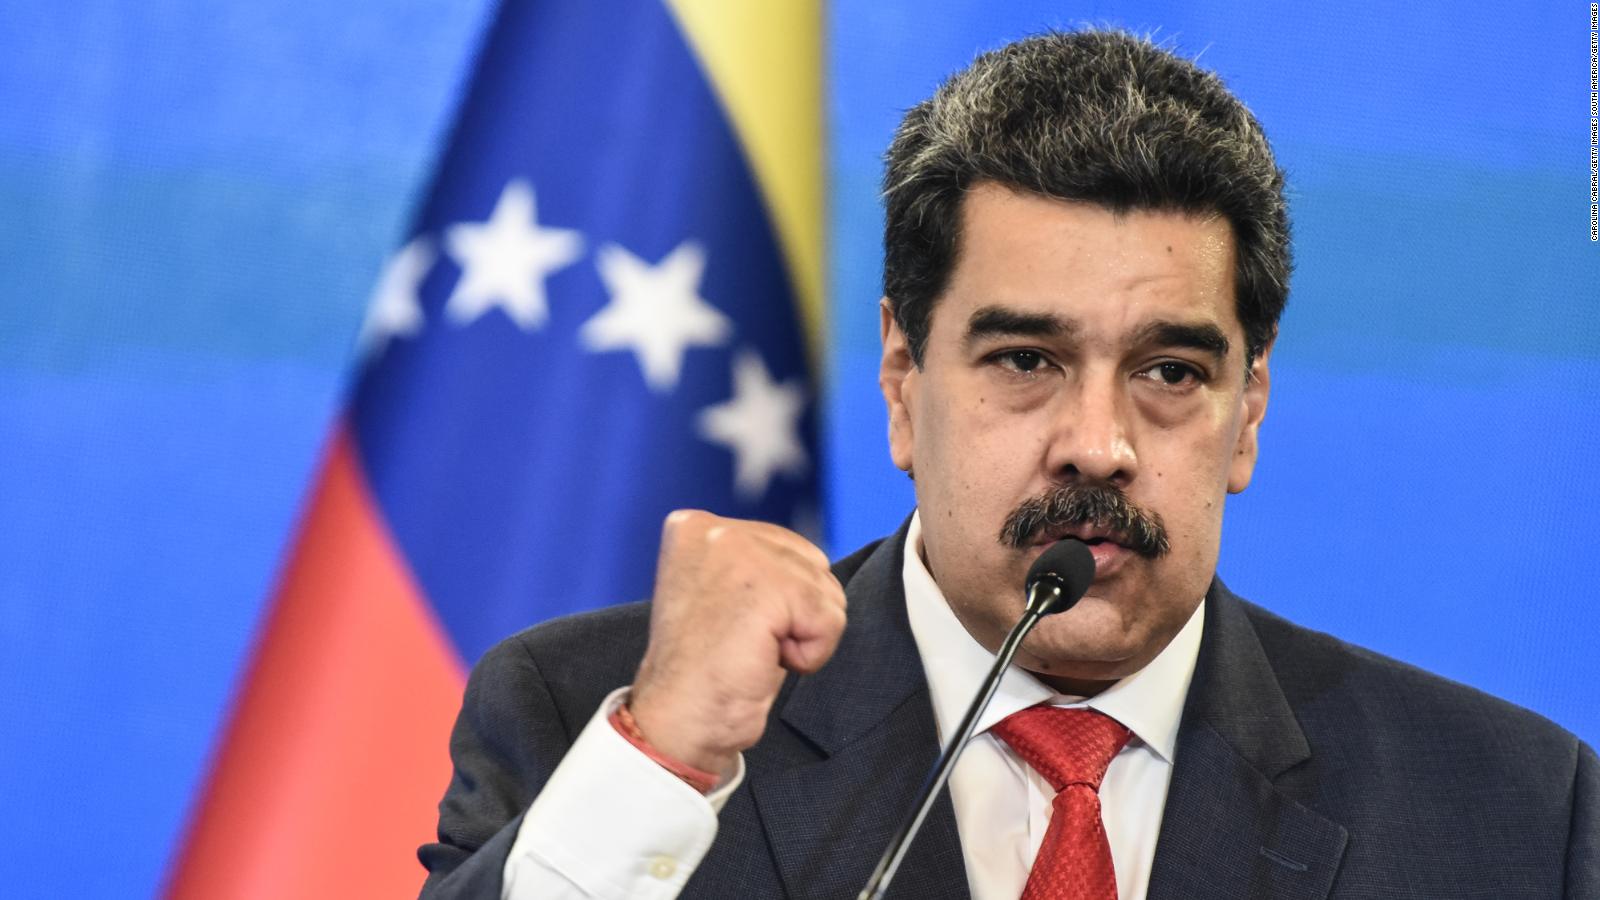 Venezuela rejects extension of United States decree declaring “unusual and extraordinary amenity”